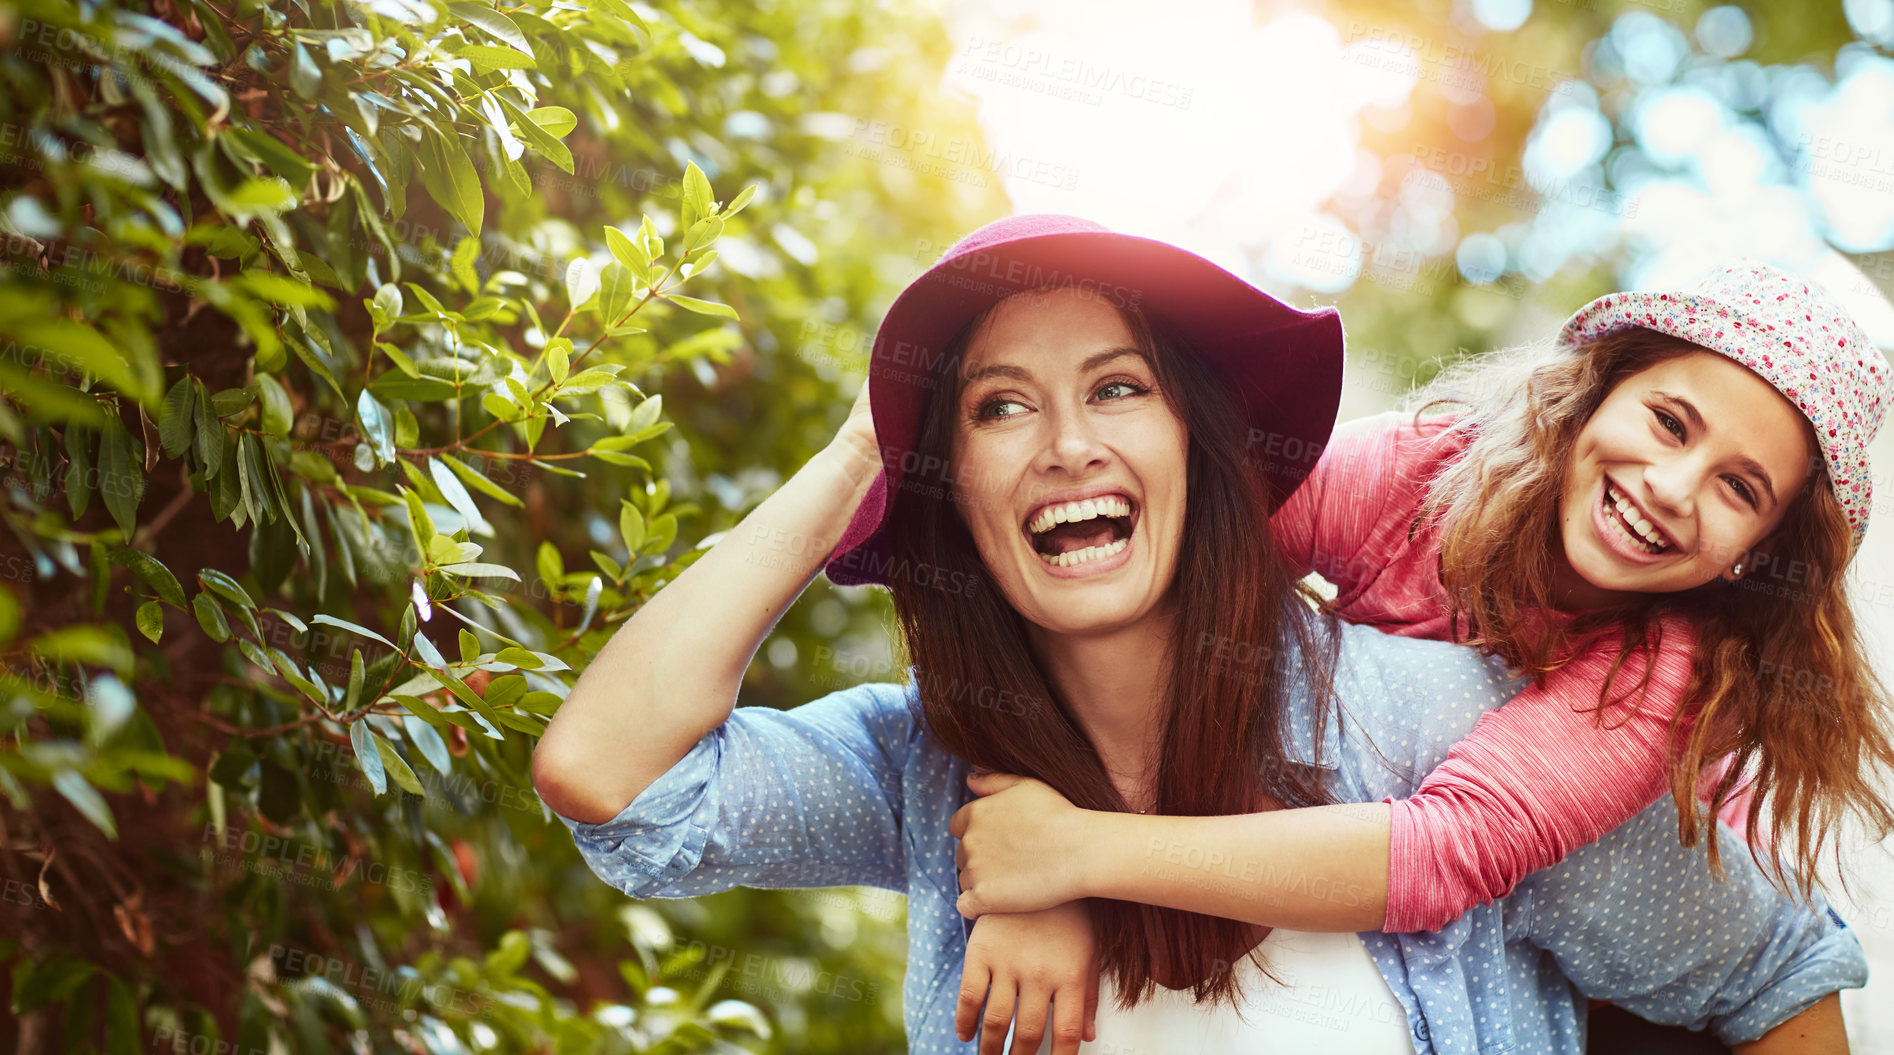 Buy stock photo A happy mother and daughter spending time together outdoors